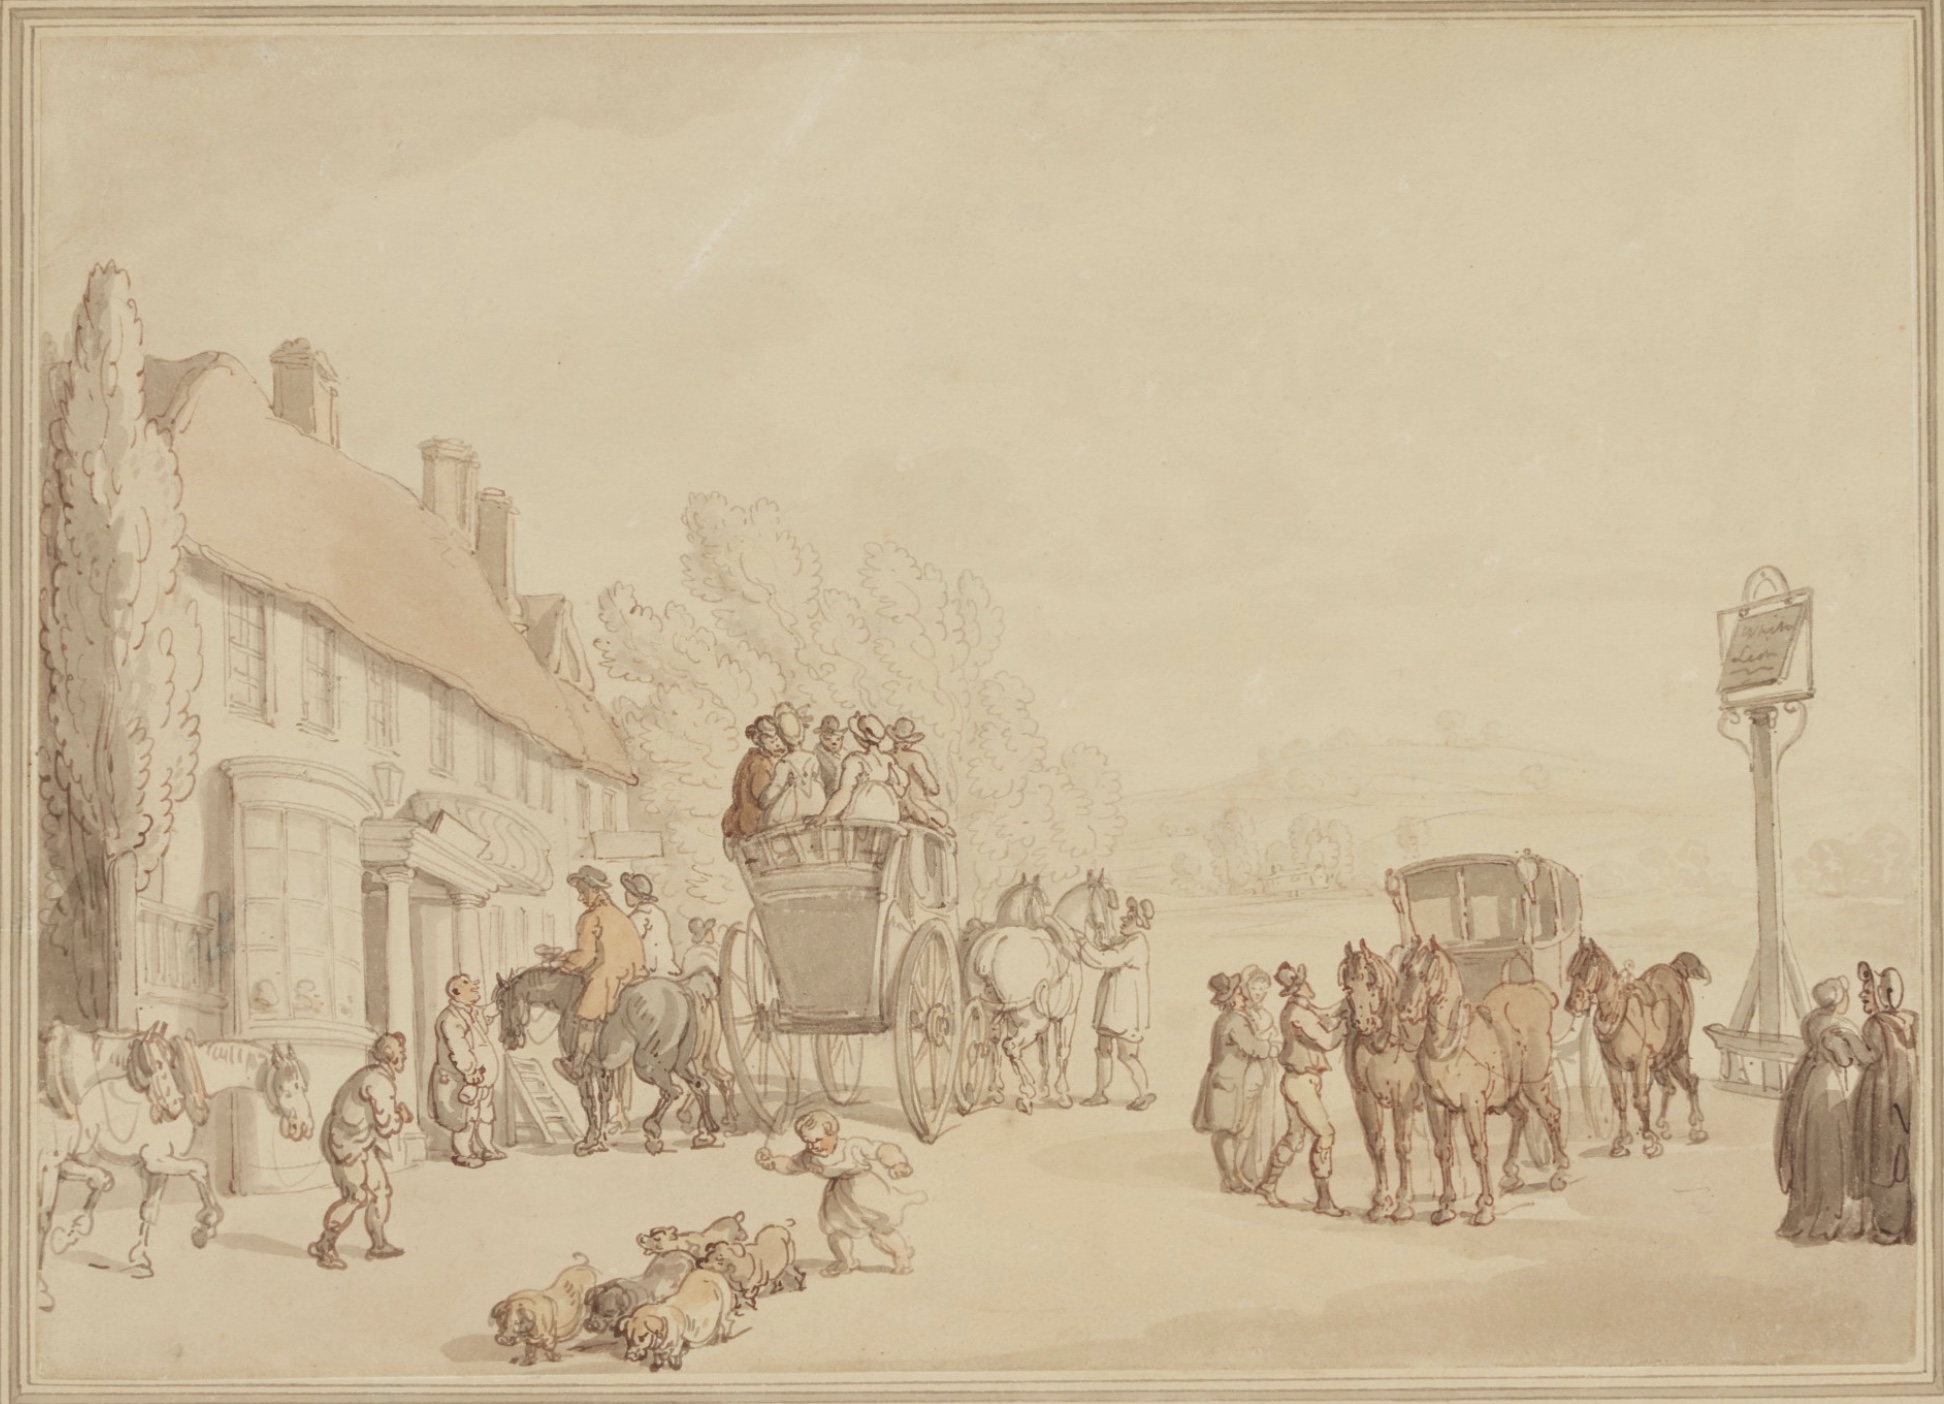 White Lion Inn, Ponders End, by Thomas Rowlandson. Click to enlarge.